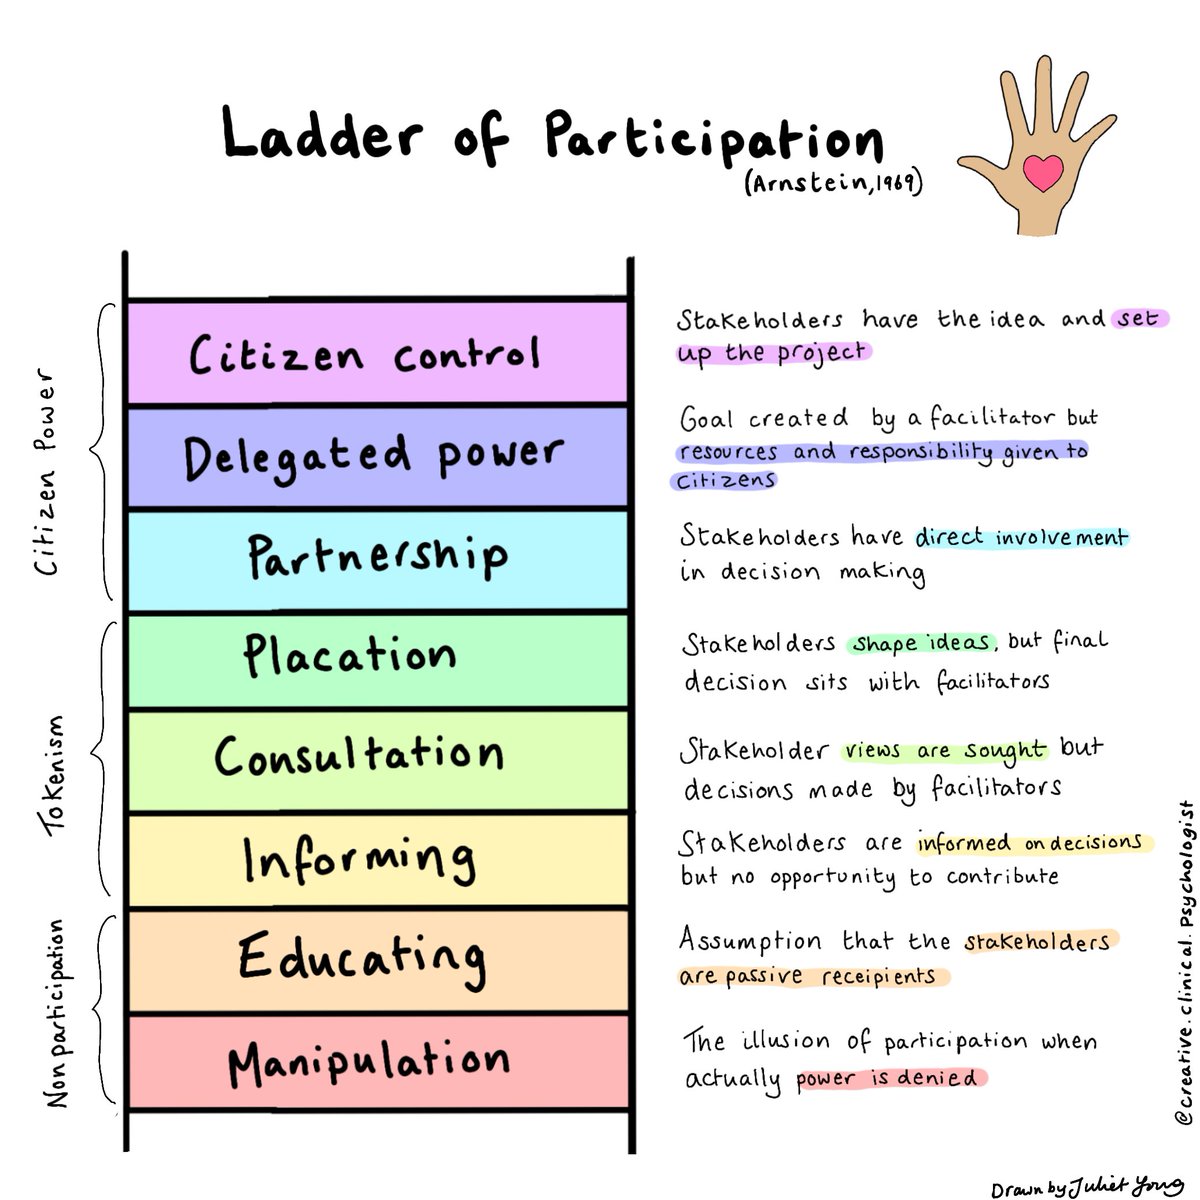 Colourful graphic of Arnstein's Ladder of Participation (1969) drawn by Juliet Young. A rainbow ladder describes the different types of participation in research - manipulation, educating, informing, consultation, placation, partnership, delegated power and citizen control.